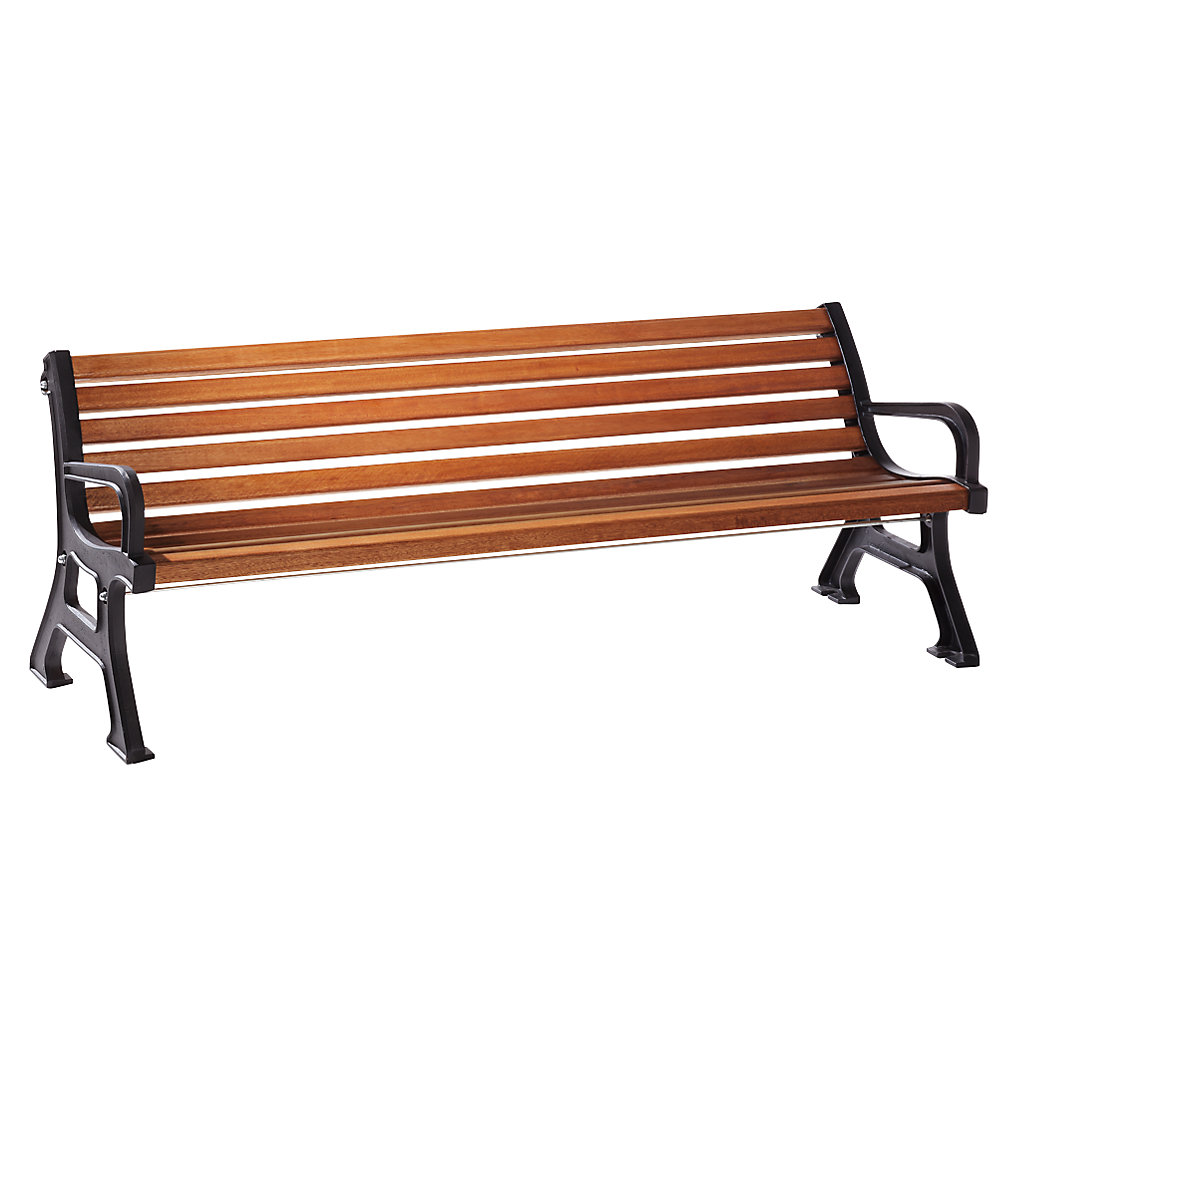 Solid wooden bench, with arm rests, meranti wood slats-5